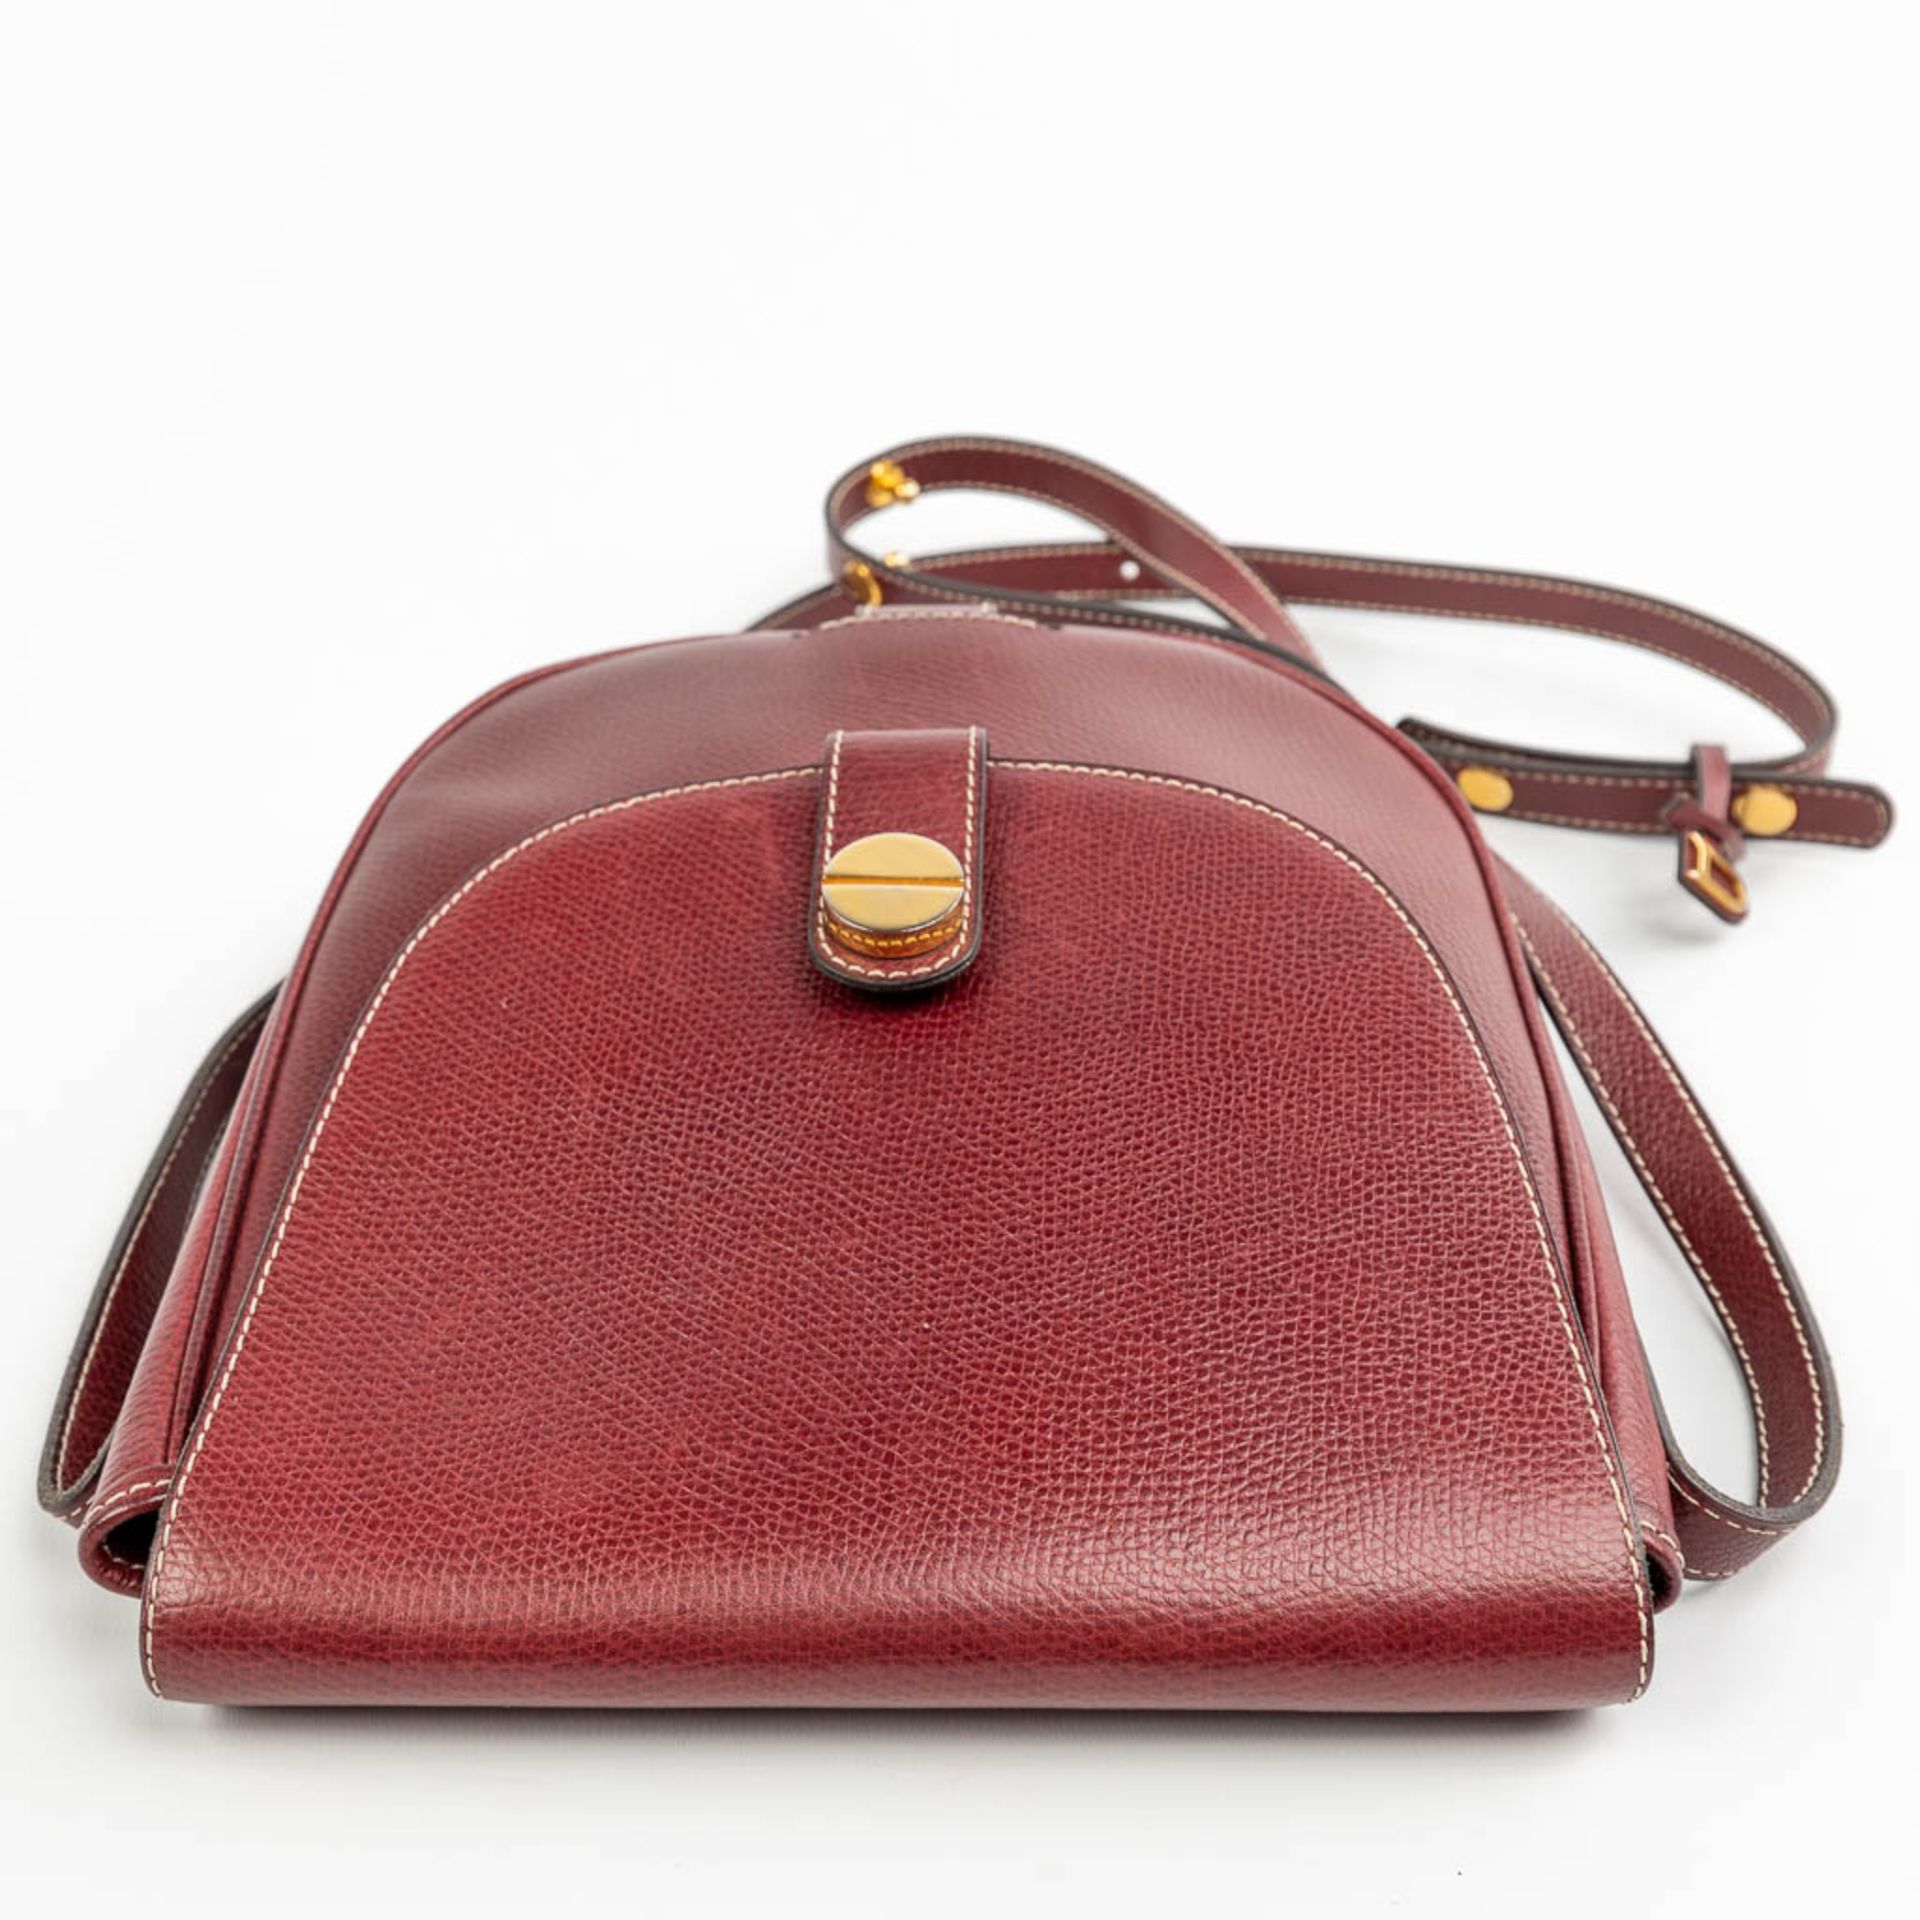 A purse made of red leather and marked Delvaux. - Image 9 of 10